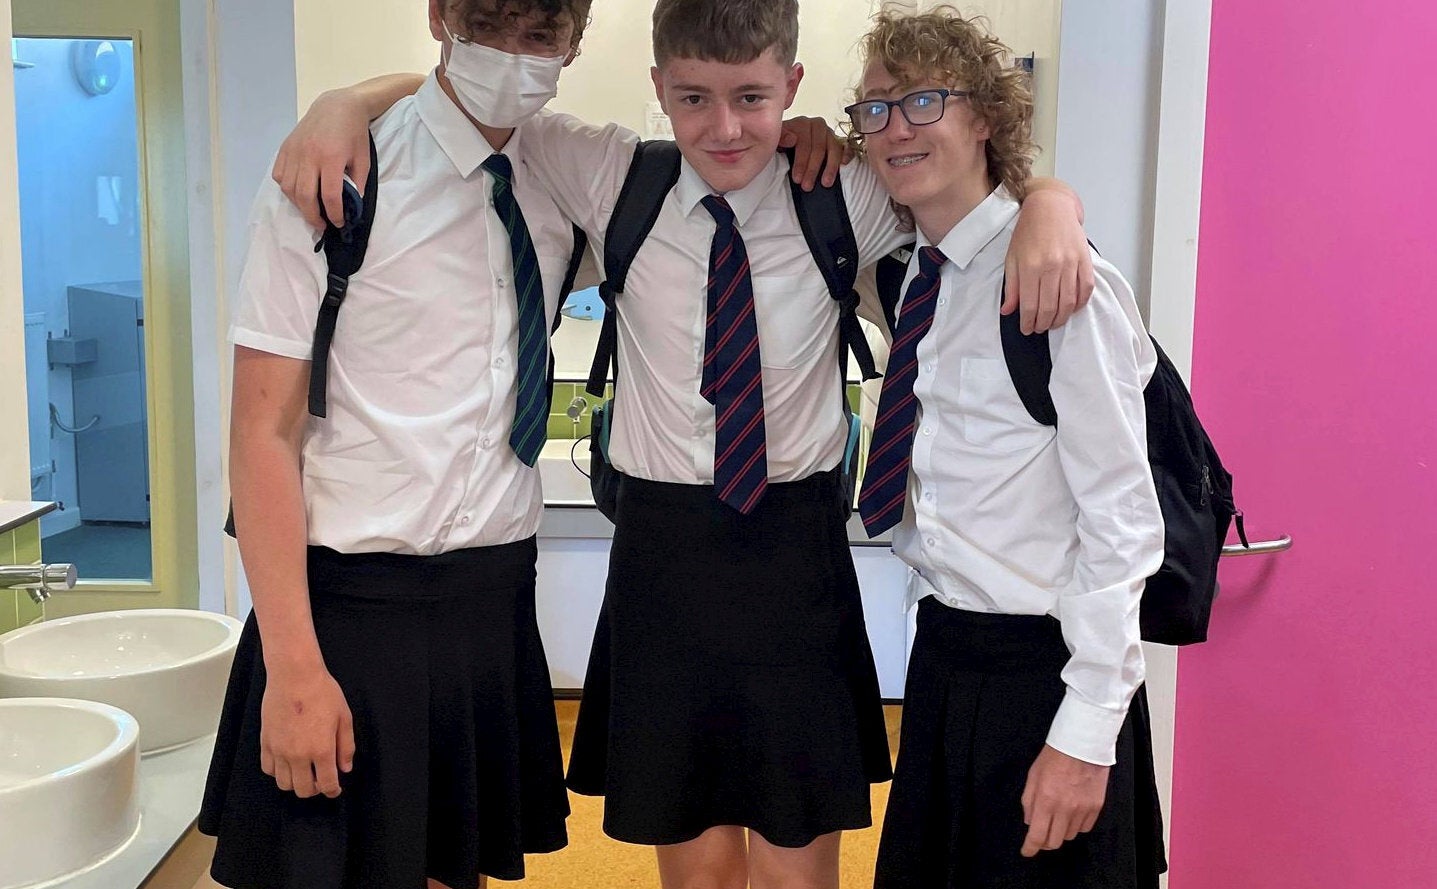 Adrian Copp (centre) and friends at Poltair School in Cornwall in their “cooler” skirts